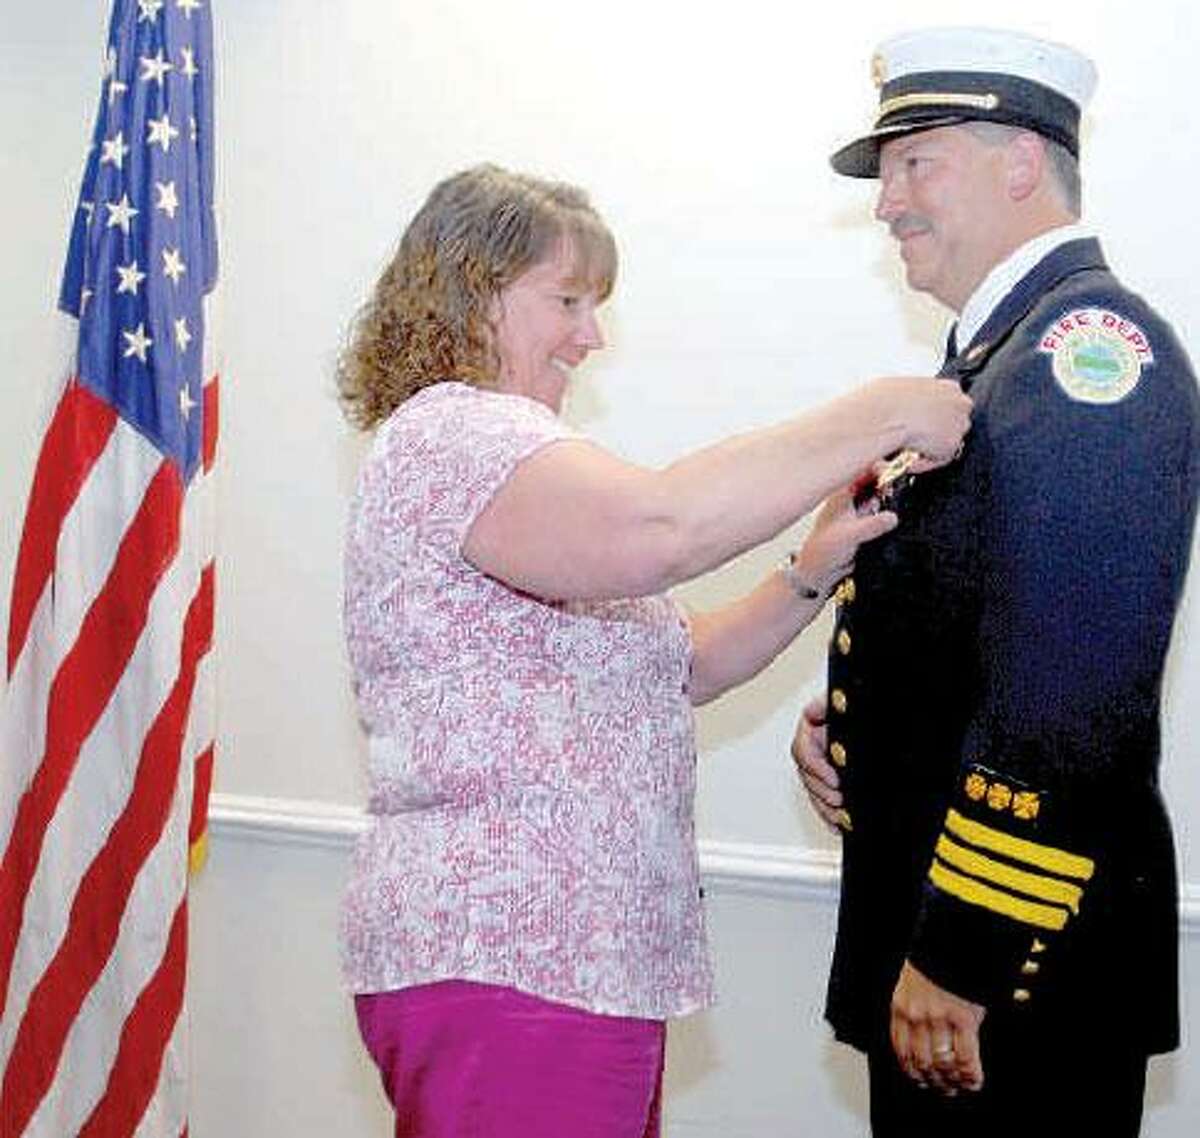 Peter Hvizdak/Register Cindy Fitzmaurice pins a badge on her husband, William Fitzmaurice, as he is promoted to battalion chief of the Hamden Fire Department during a swearing-in ceremony recently at the Hamden Government Center.